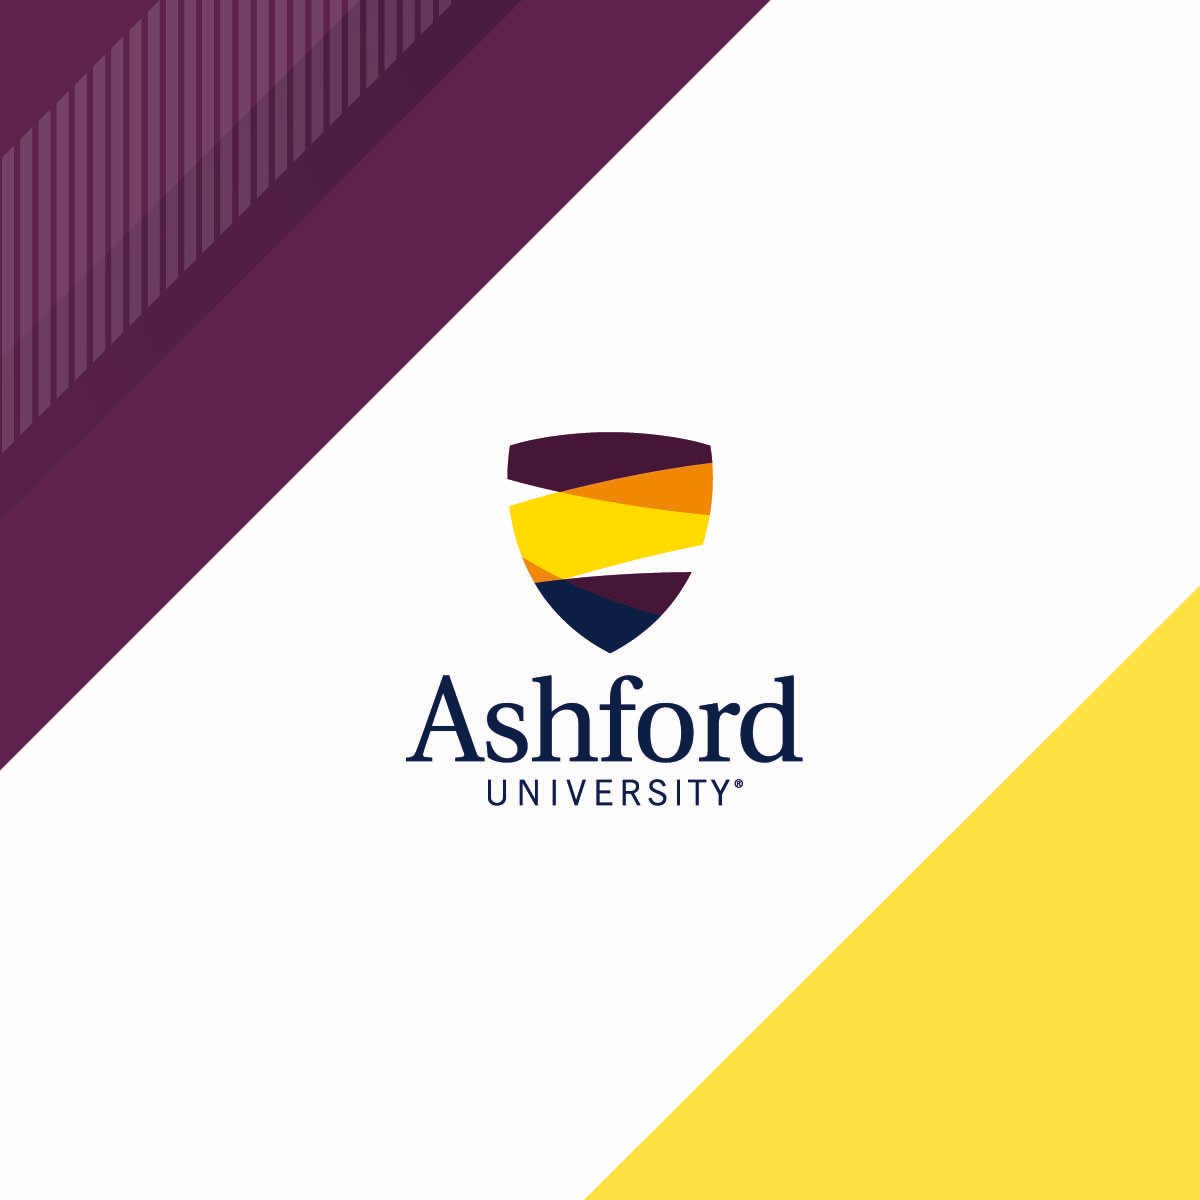 Ashford U's closure and what it says about for-profit higher ed